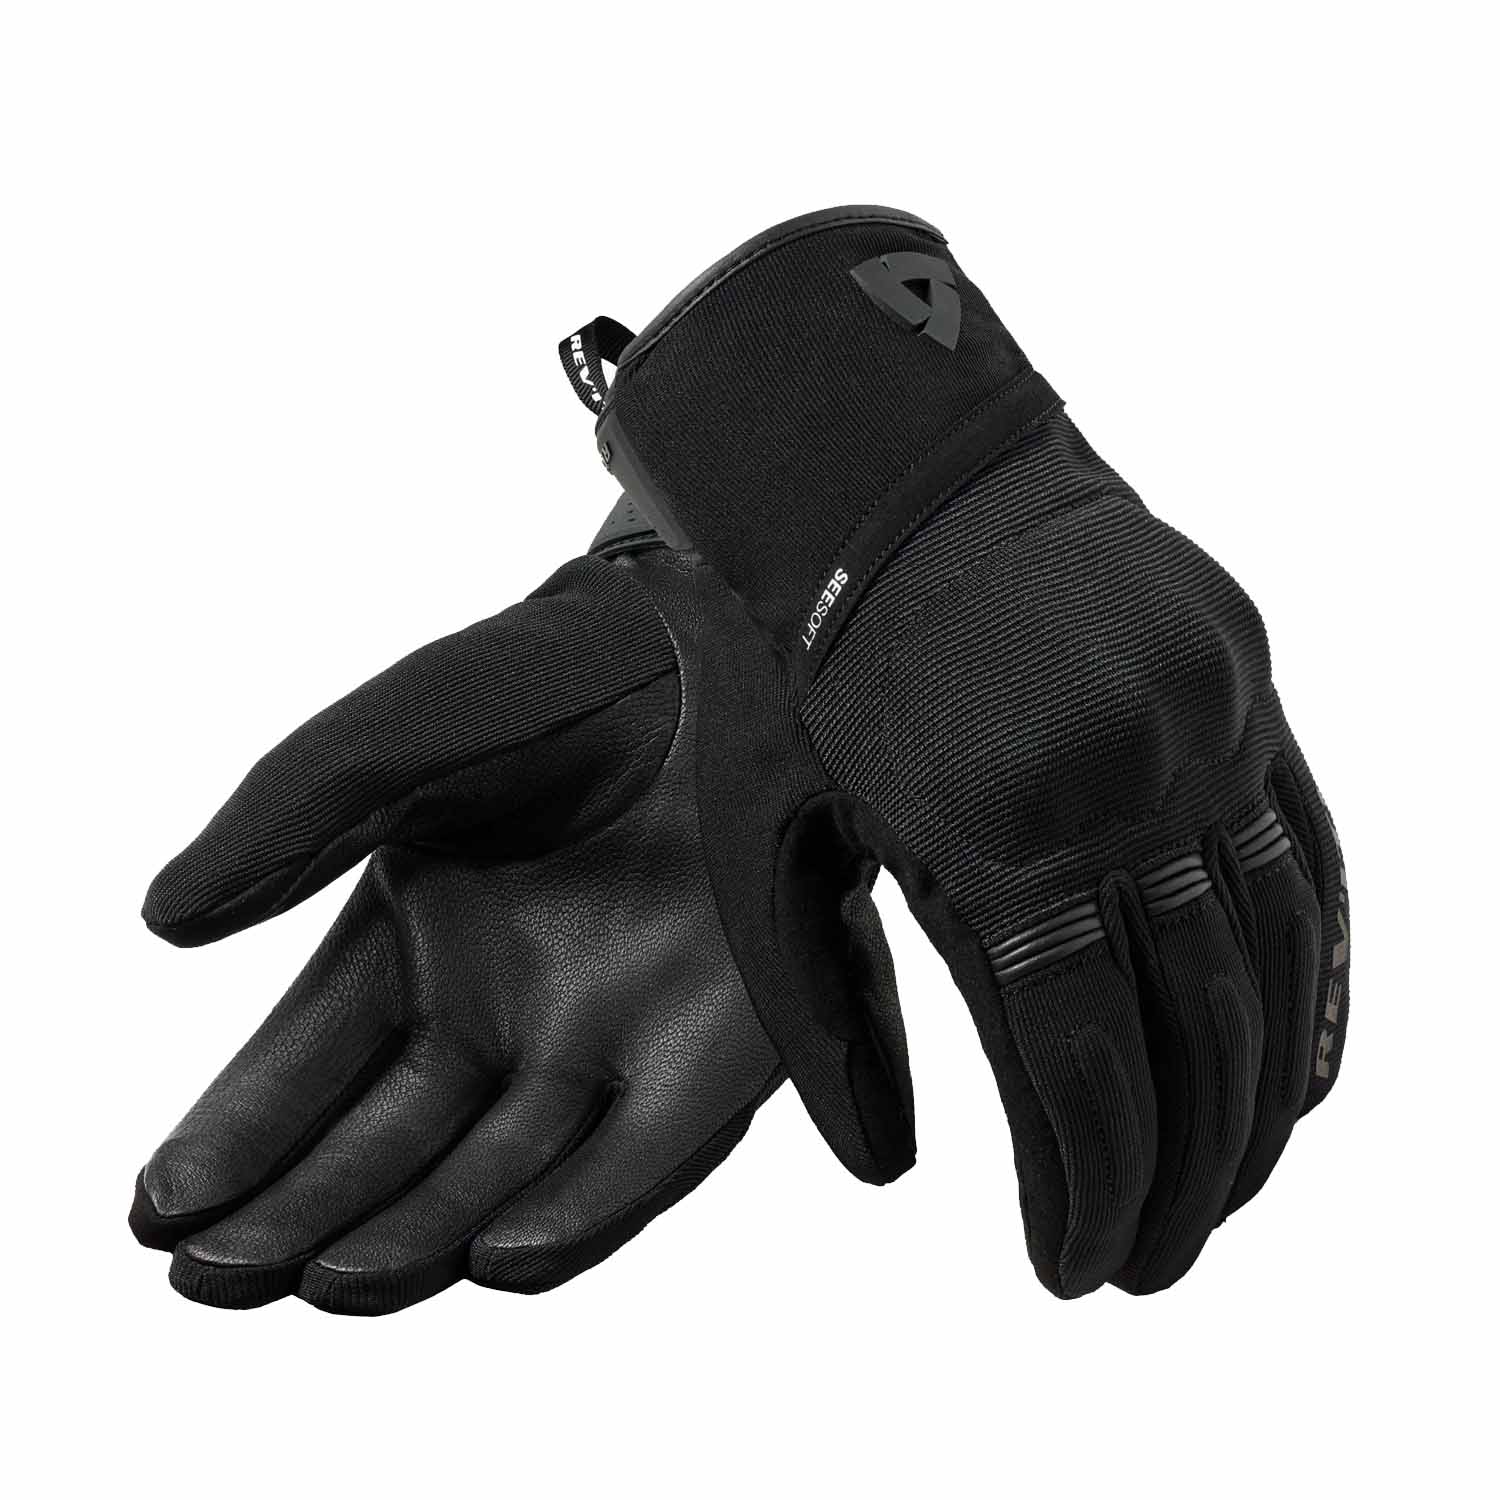 Image of EU REV'IT! Mosca 2 H2O Gloves Black Taille 2XL